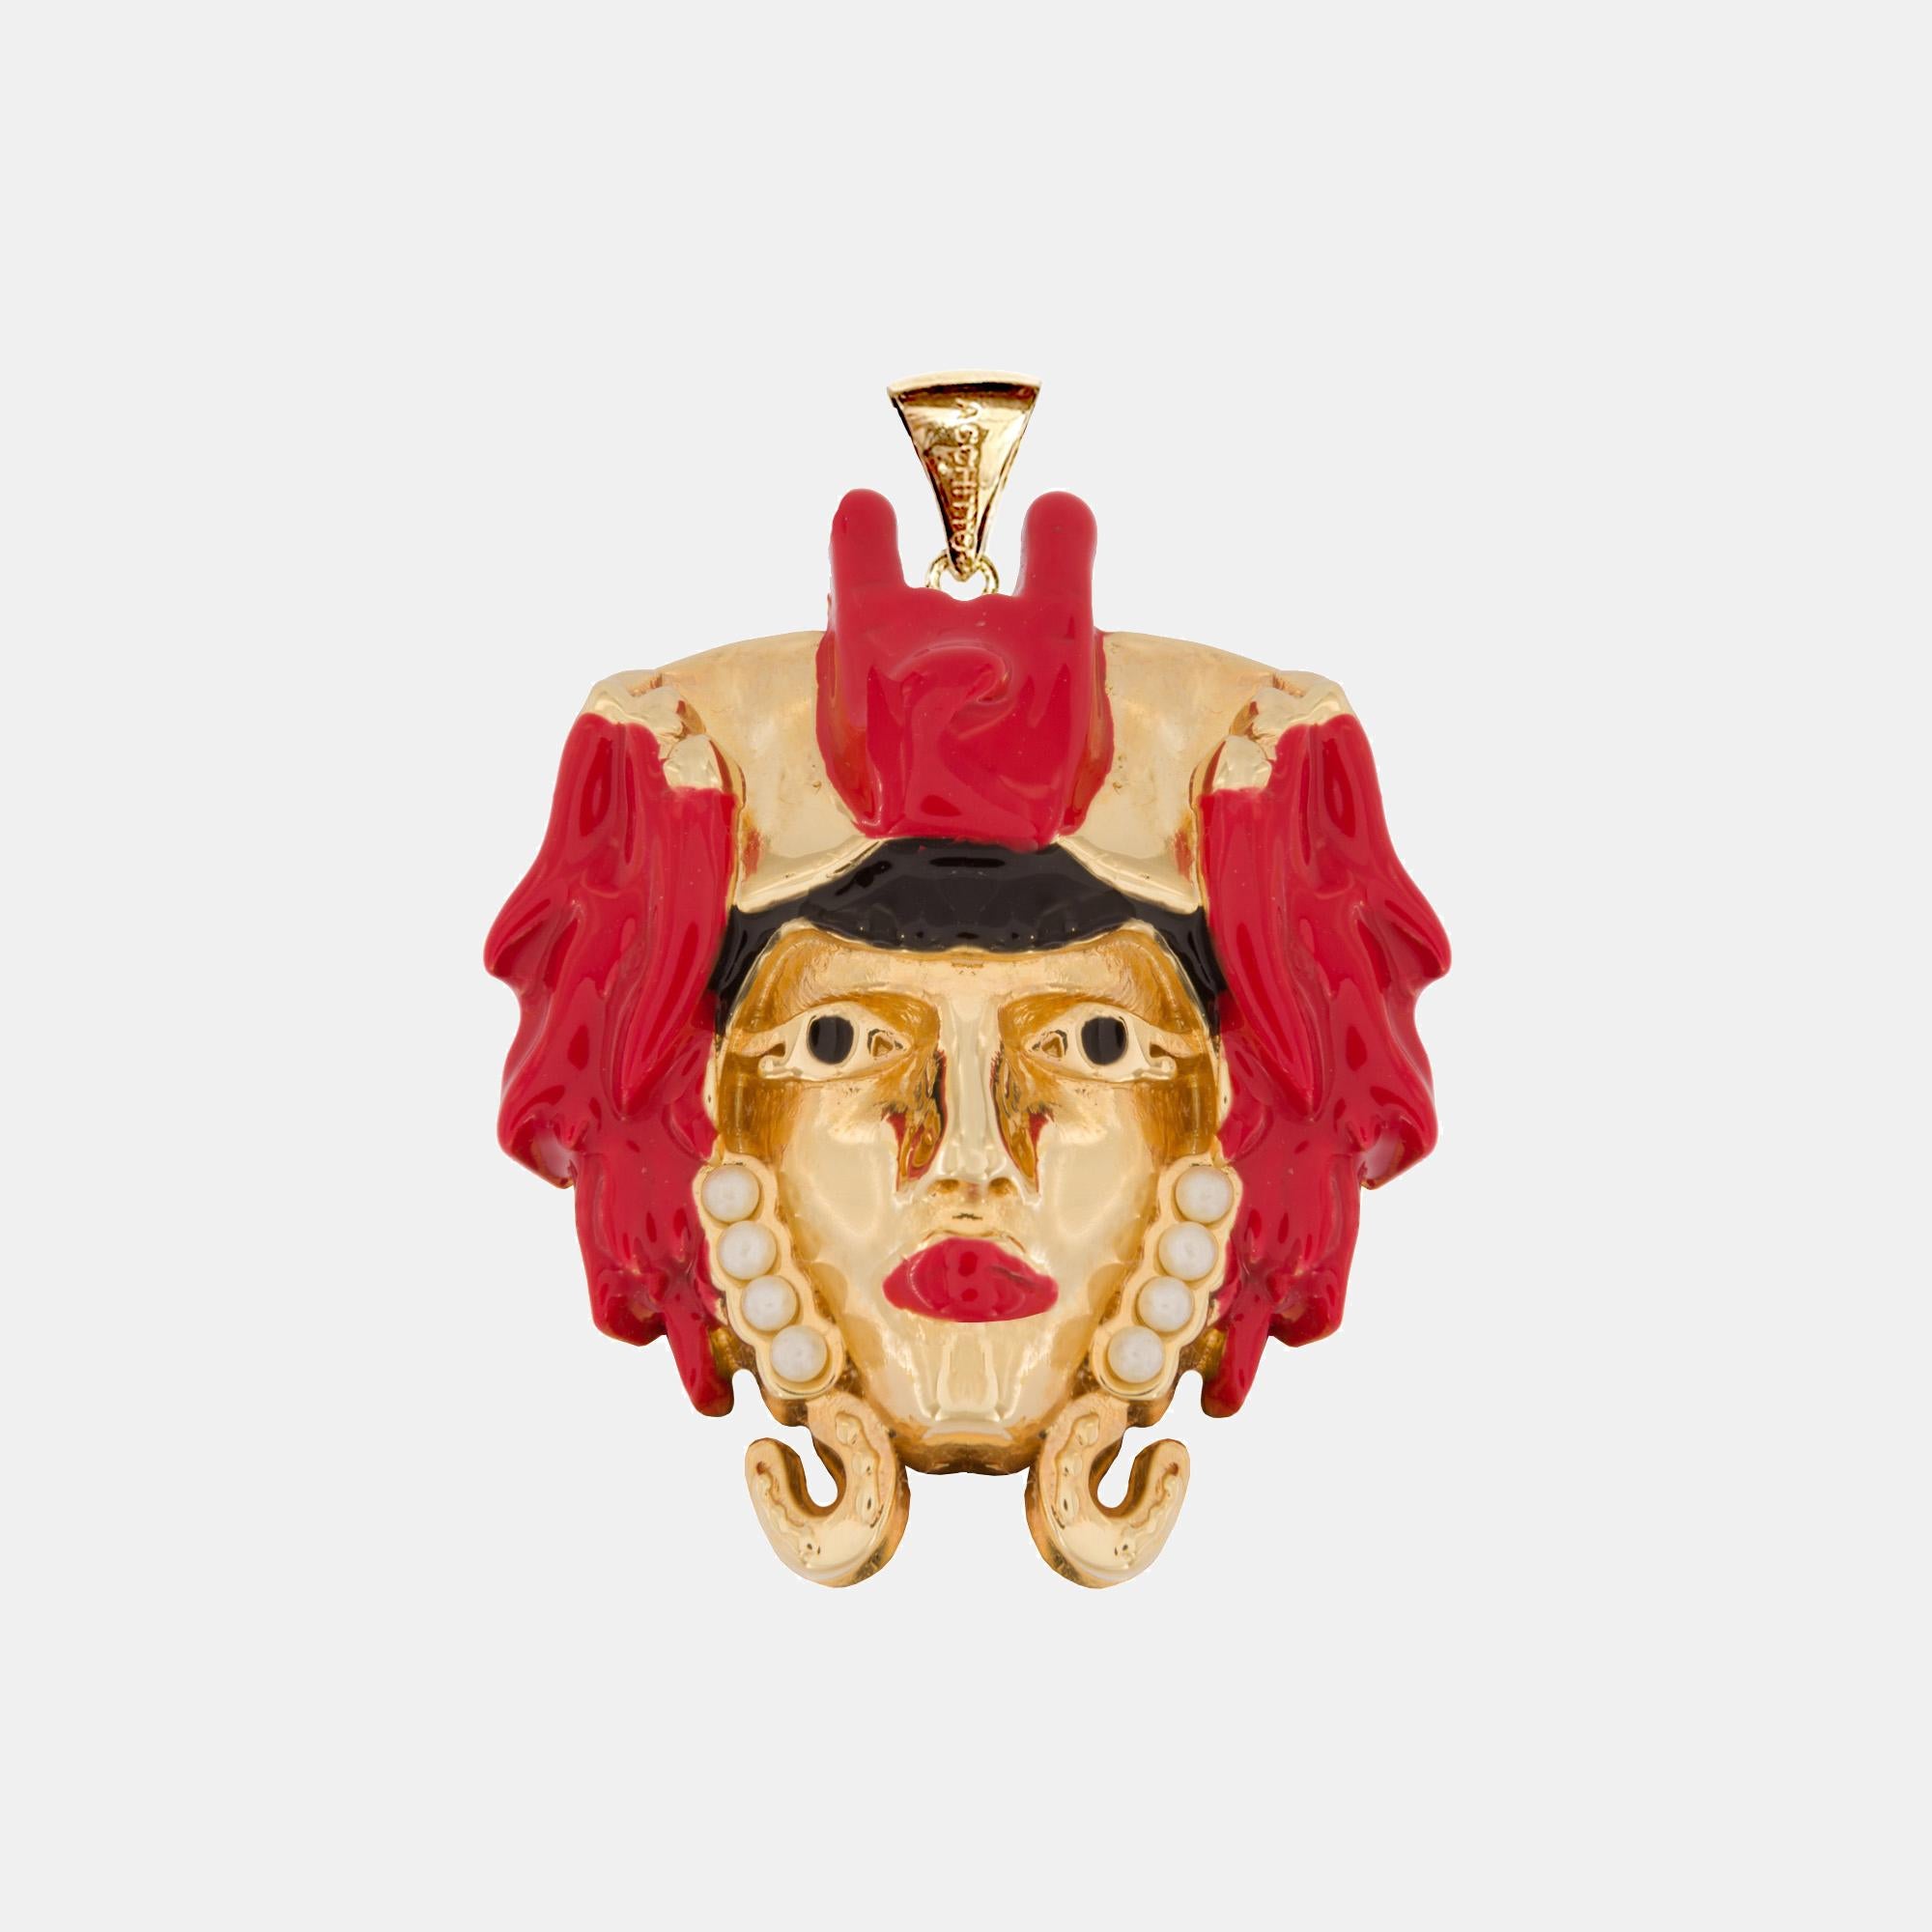 The Moro Iconic Pendant Fortunato Red made of 18K gold plated brass and embellished with Swarovski crystals and colored enamels, can be worn in different ways: it can be matched with Acchitto Stilla drop earrings, Acchitto Aurea necklaces, but also